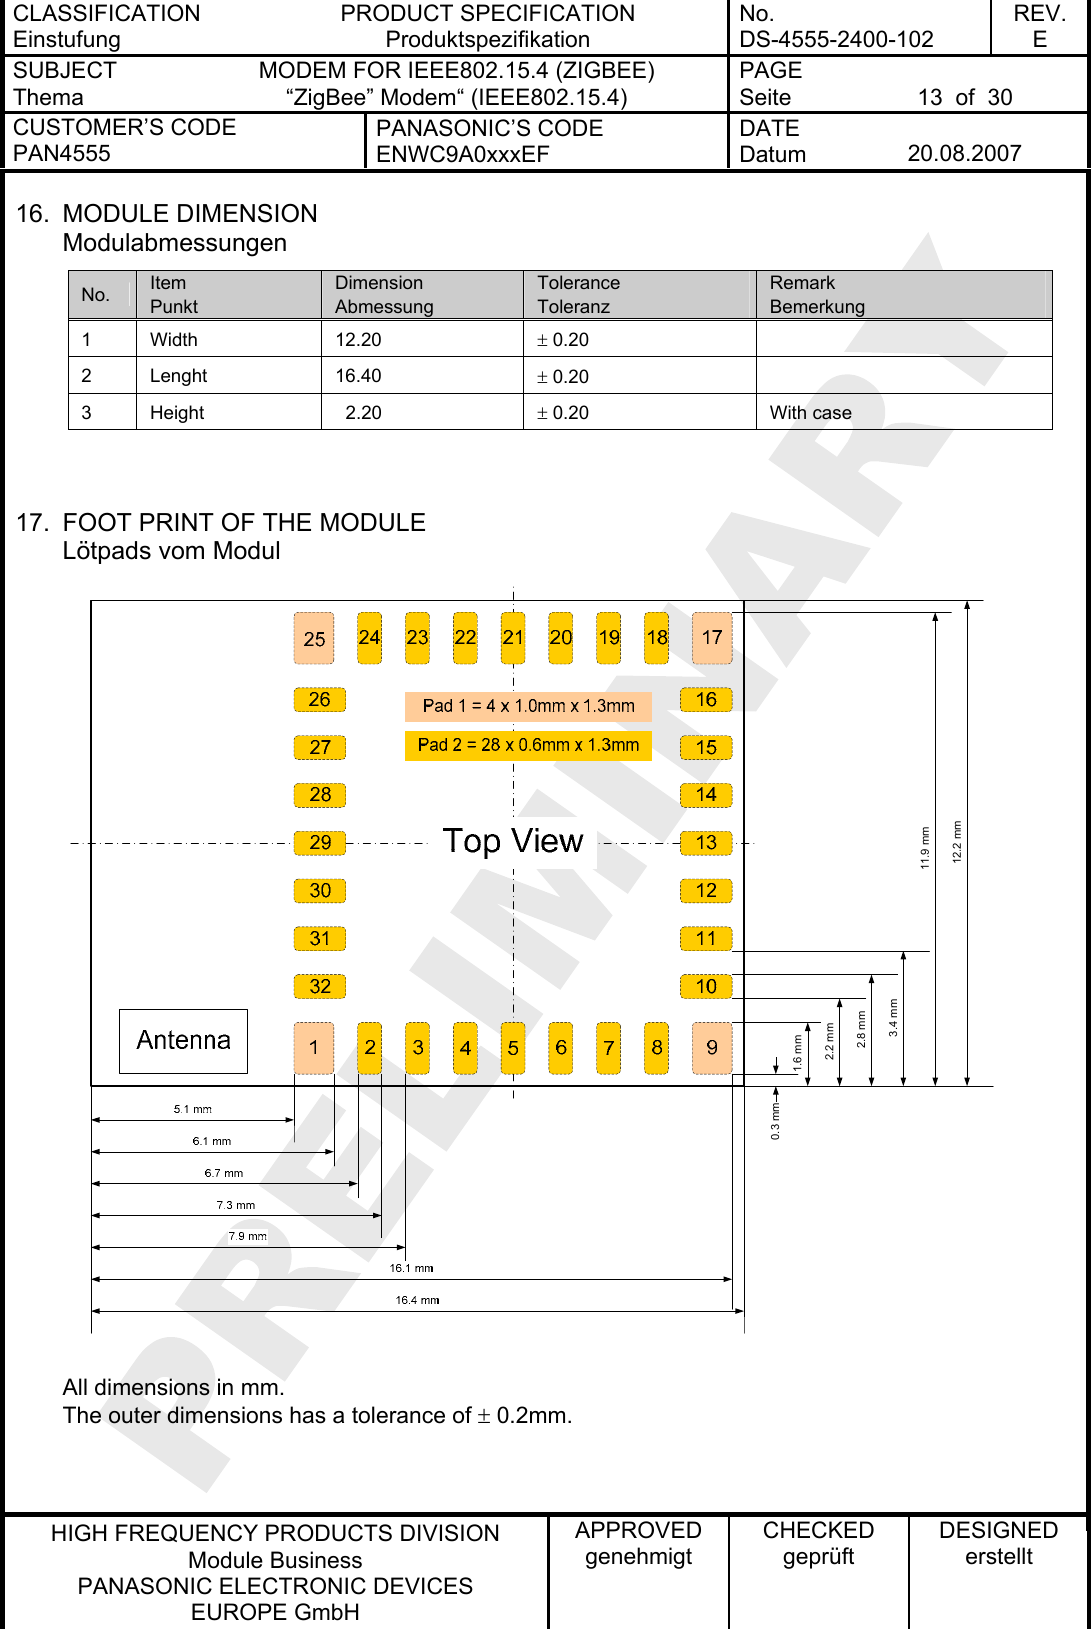 CLASSIFICATION Einstufung PRODUCT SPECIFICATION Produktspezifikation No. DS-4555-2400-102 REV. E SUBJECT Thema MODEM FOR IEEE802.15.4 (ZIGBEE) “ZigBee” Modem“ (IEEE802.15.4) PAGE Seite  13  of  30 CUSTOMER’S CODE PAN4555 PANASONIC’S CODE ENWC9A0xxxEF DATE Datum  20.08.2007   HIGH FREQUENCY PRODUCTS DIVISION Module Business PANASONIC ELECTRONIC DEVICES  EUROPE GmbH APPROVED genehmigt CHECKED geprüft DESIGNED erstellt 16. MODULE DIMENSION Modulabmessungen No.  Item Punkt Dimension Abmessung Tolerance Toleranz Remark Bemerkung 1 Width  12.20  ± 0.20   2 Lenght  16.40  ± 0.20   3  Height    2.20  ± 0.20  With case   17.  FOOT PRINT OF THE MODULE Lötpads vom Modul  All dimensions in mm. The outer dimensions has a tolerance of ± 0.2mm. 0.3 mm1.6 mm2.2 mm2.8 mm3.4 mm11.9 mm12.2 mm 